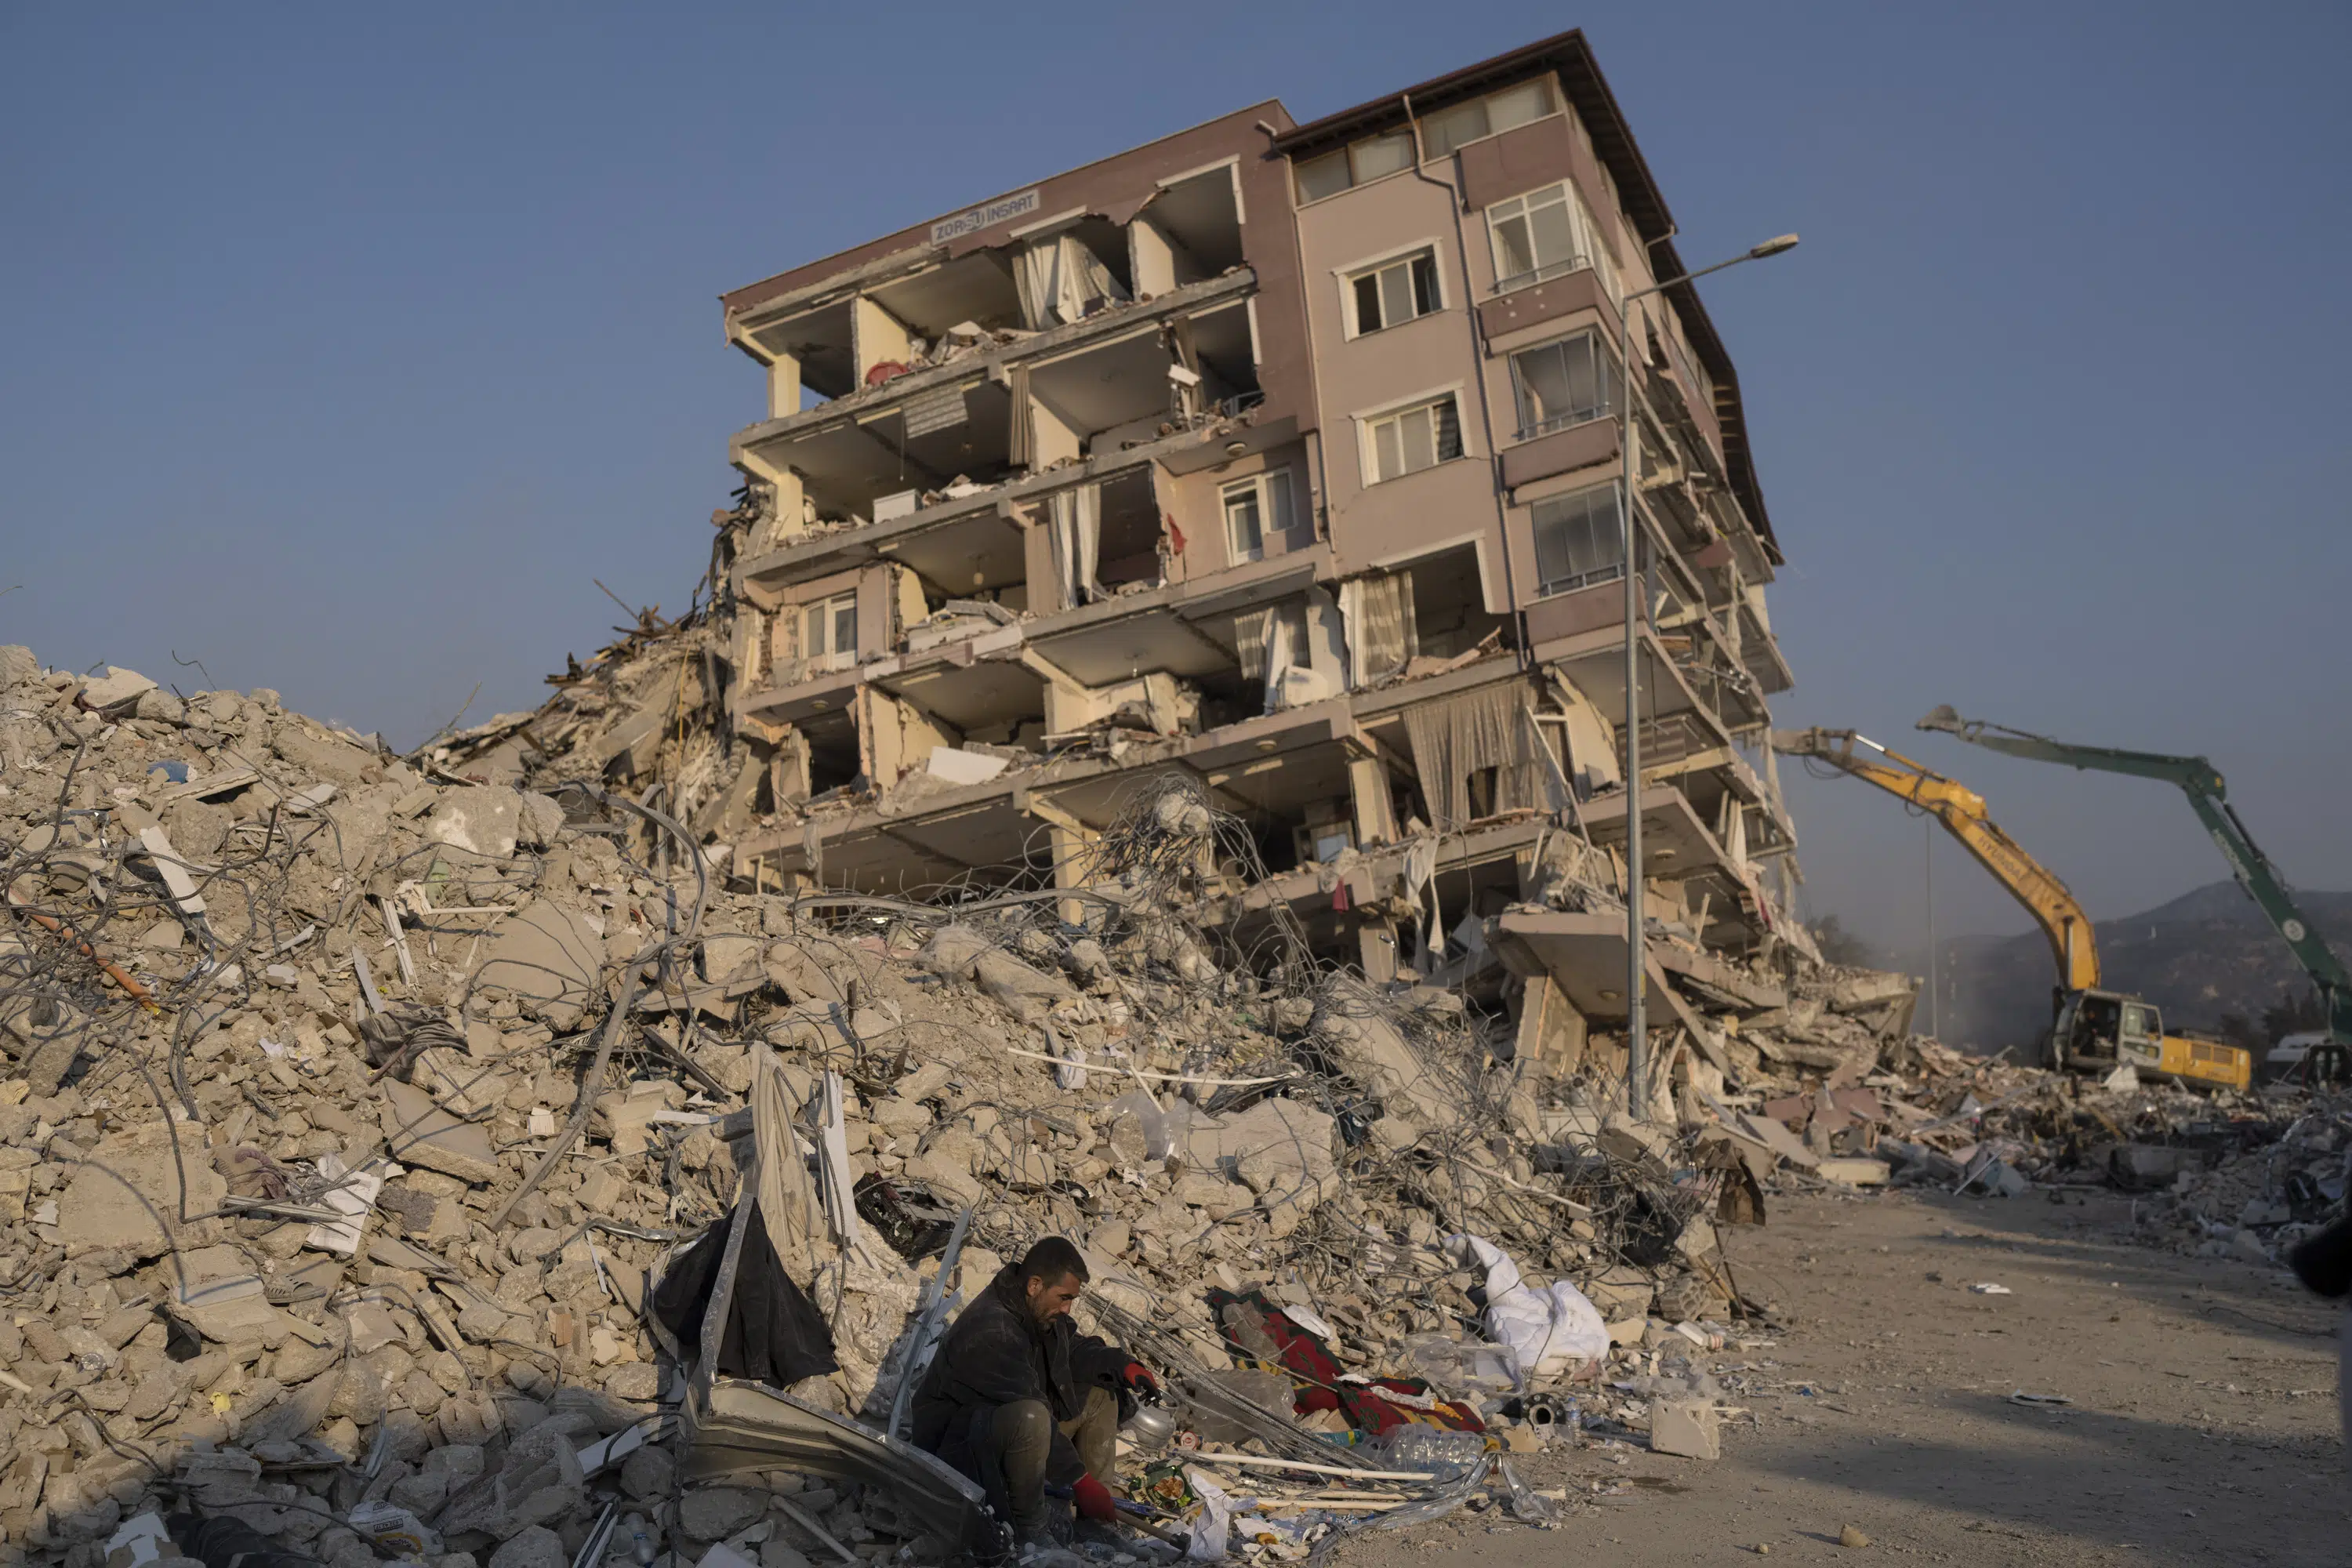 As survival window closes, more rescued in quake in Turkey